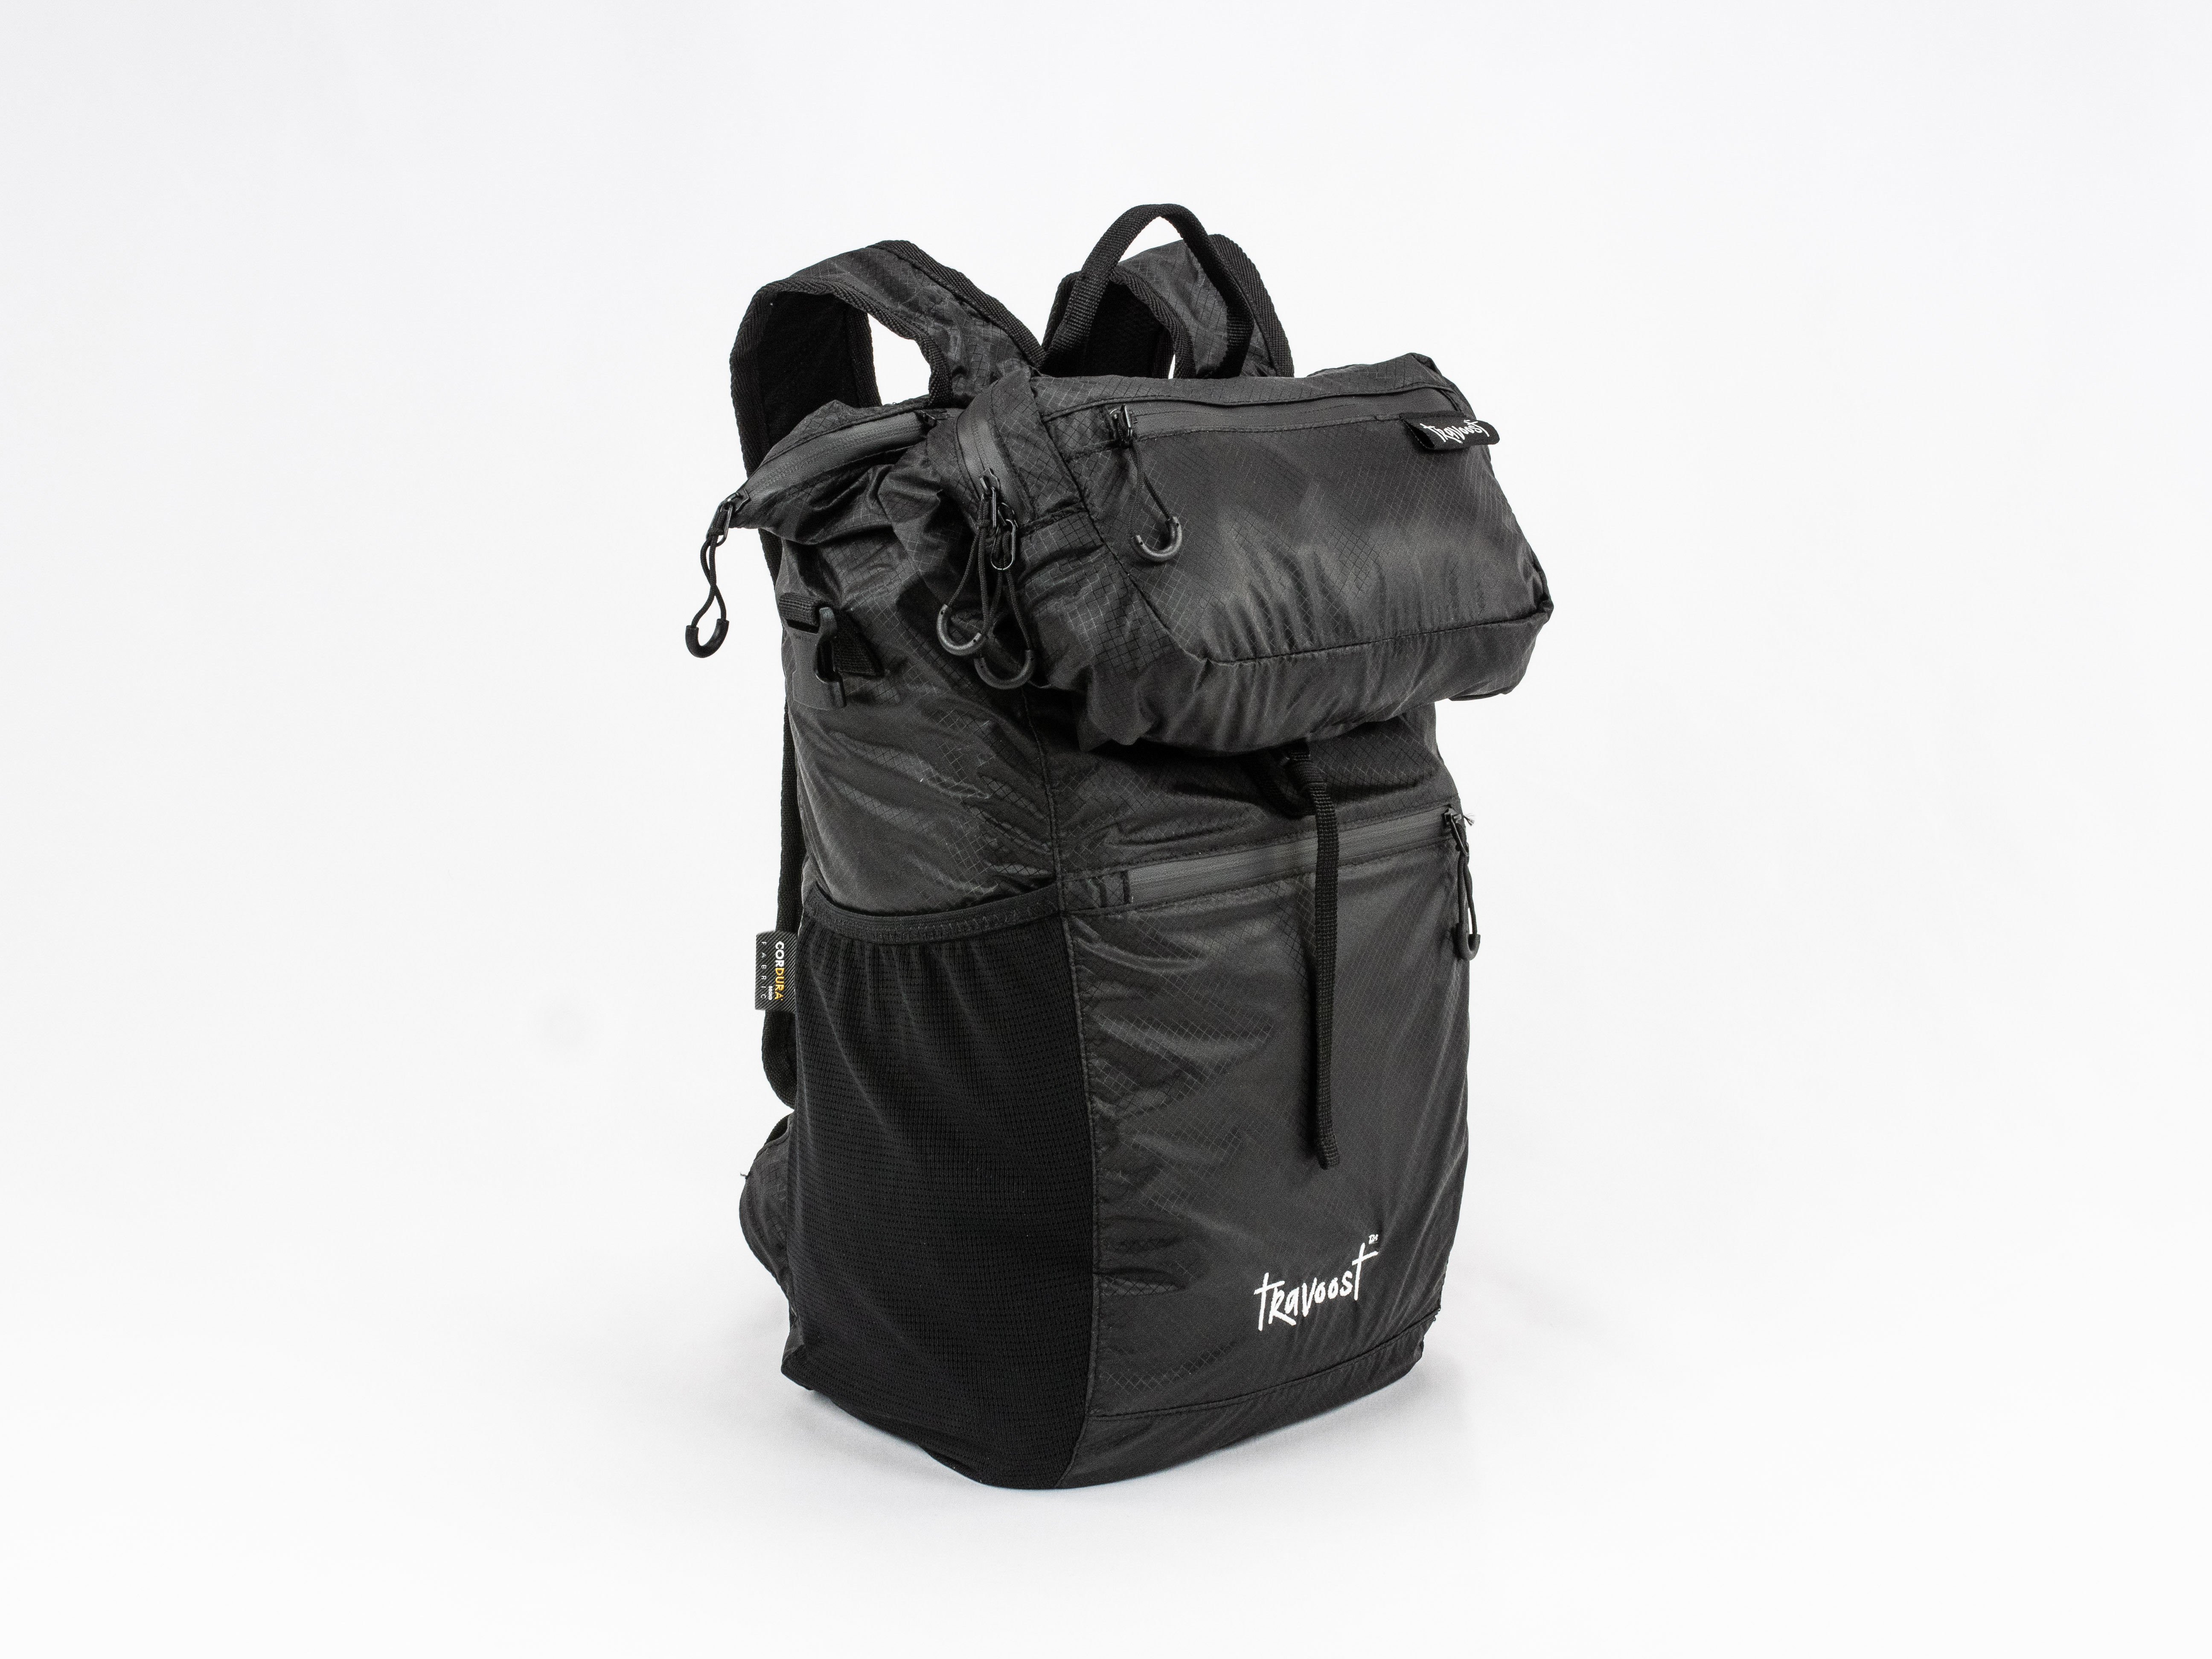 Cordura® Fabric ITA Backpack (Black) – The Artistry Collection